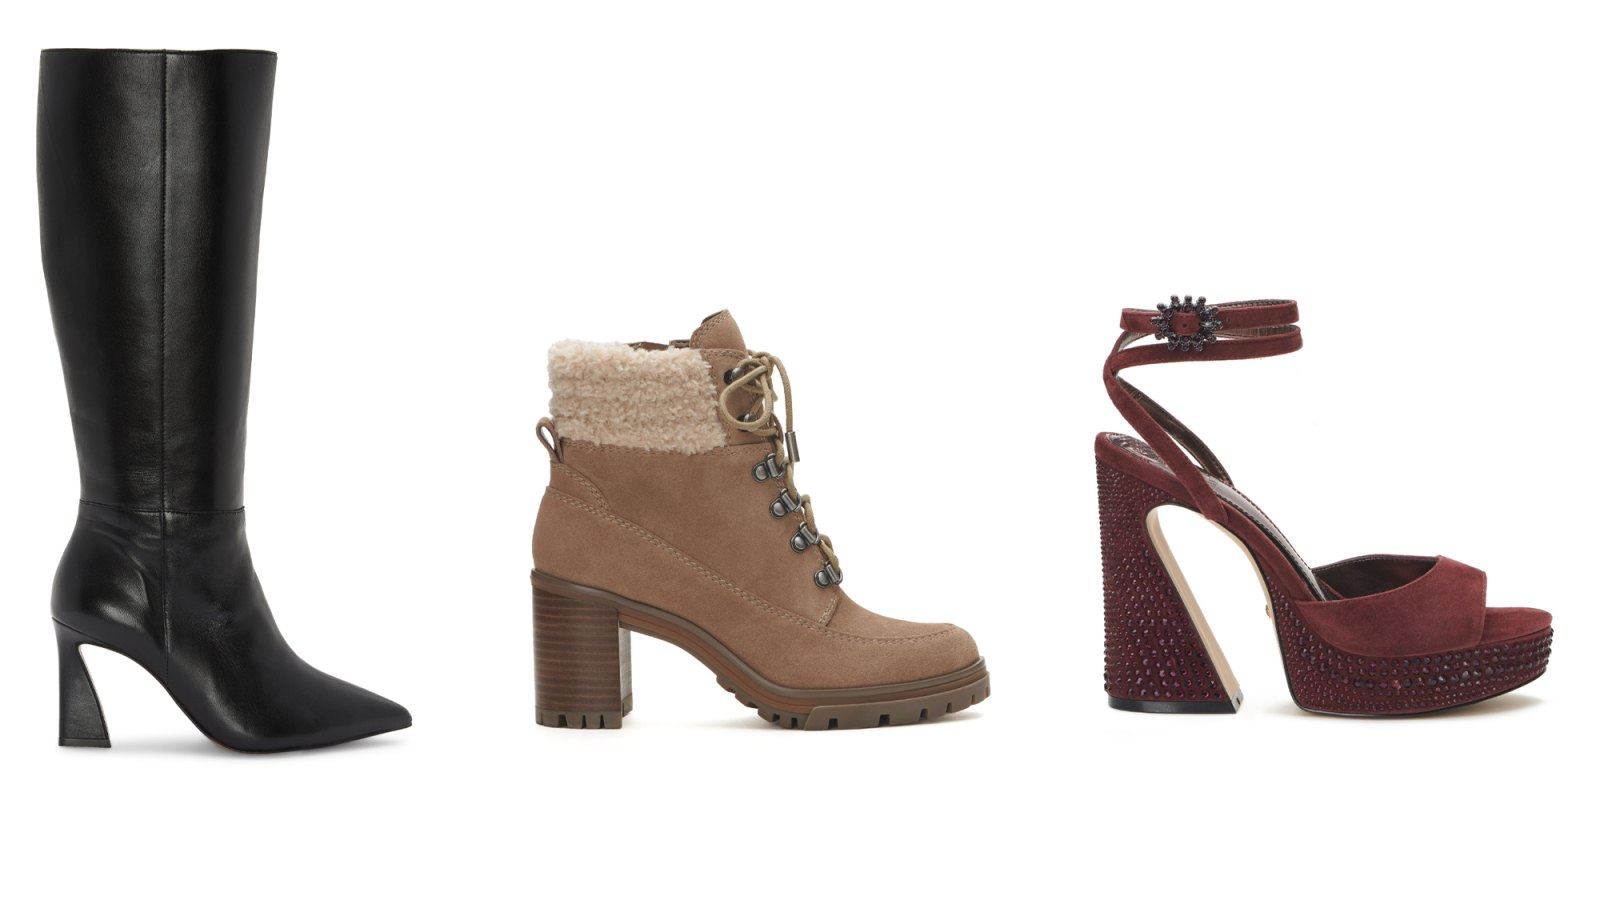 Is Vince Camuto a Good Brand? Why His Shoes Are Popular